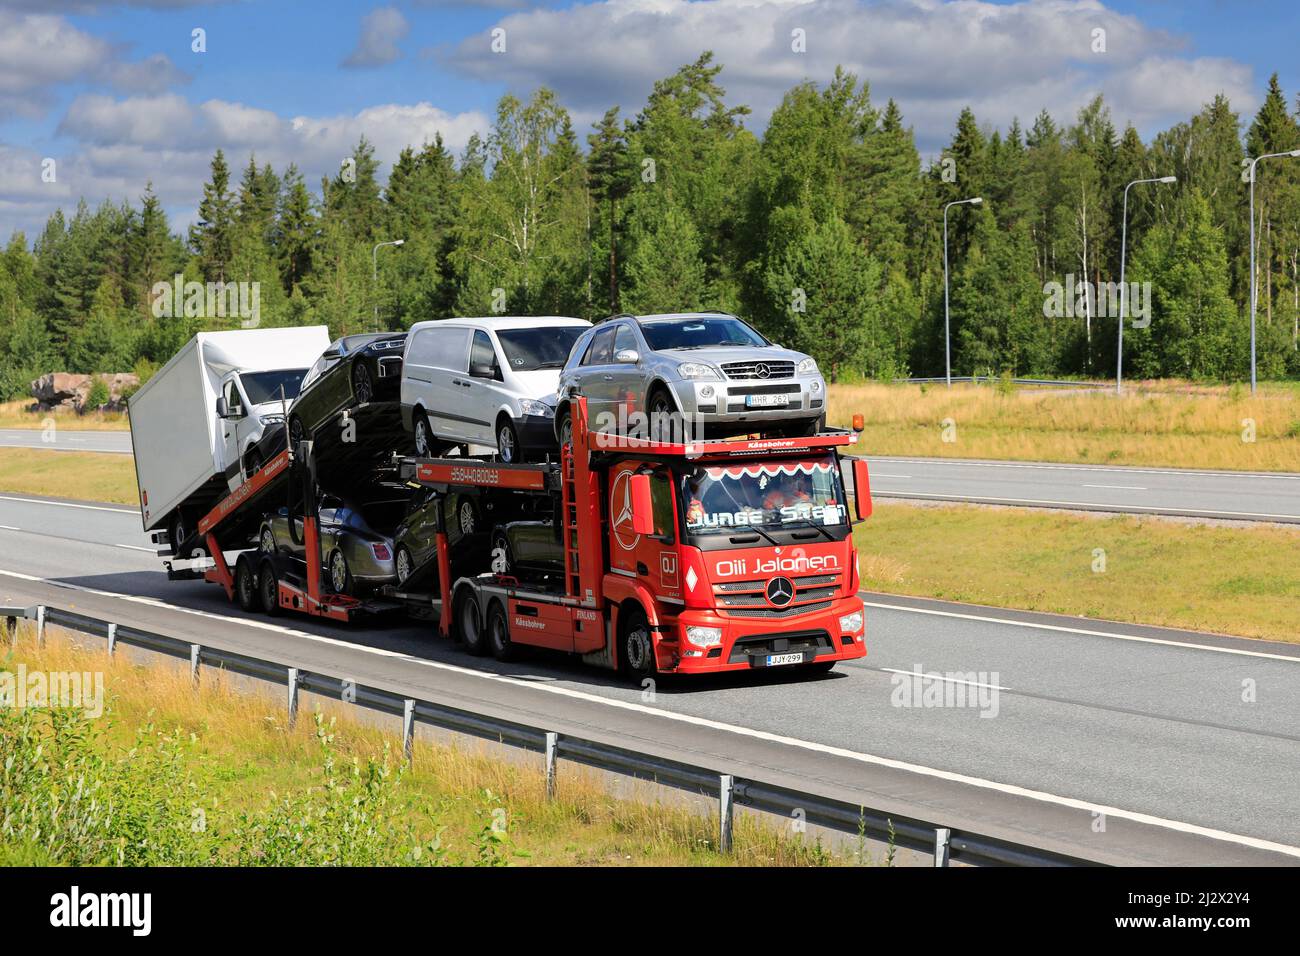 Red Mercedes-Benz Actros car carrier Oili Jalonen transports vehicles along motorway on a day of summer. Salo, Finland. July 10, 2020. Stock Photo